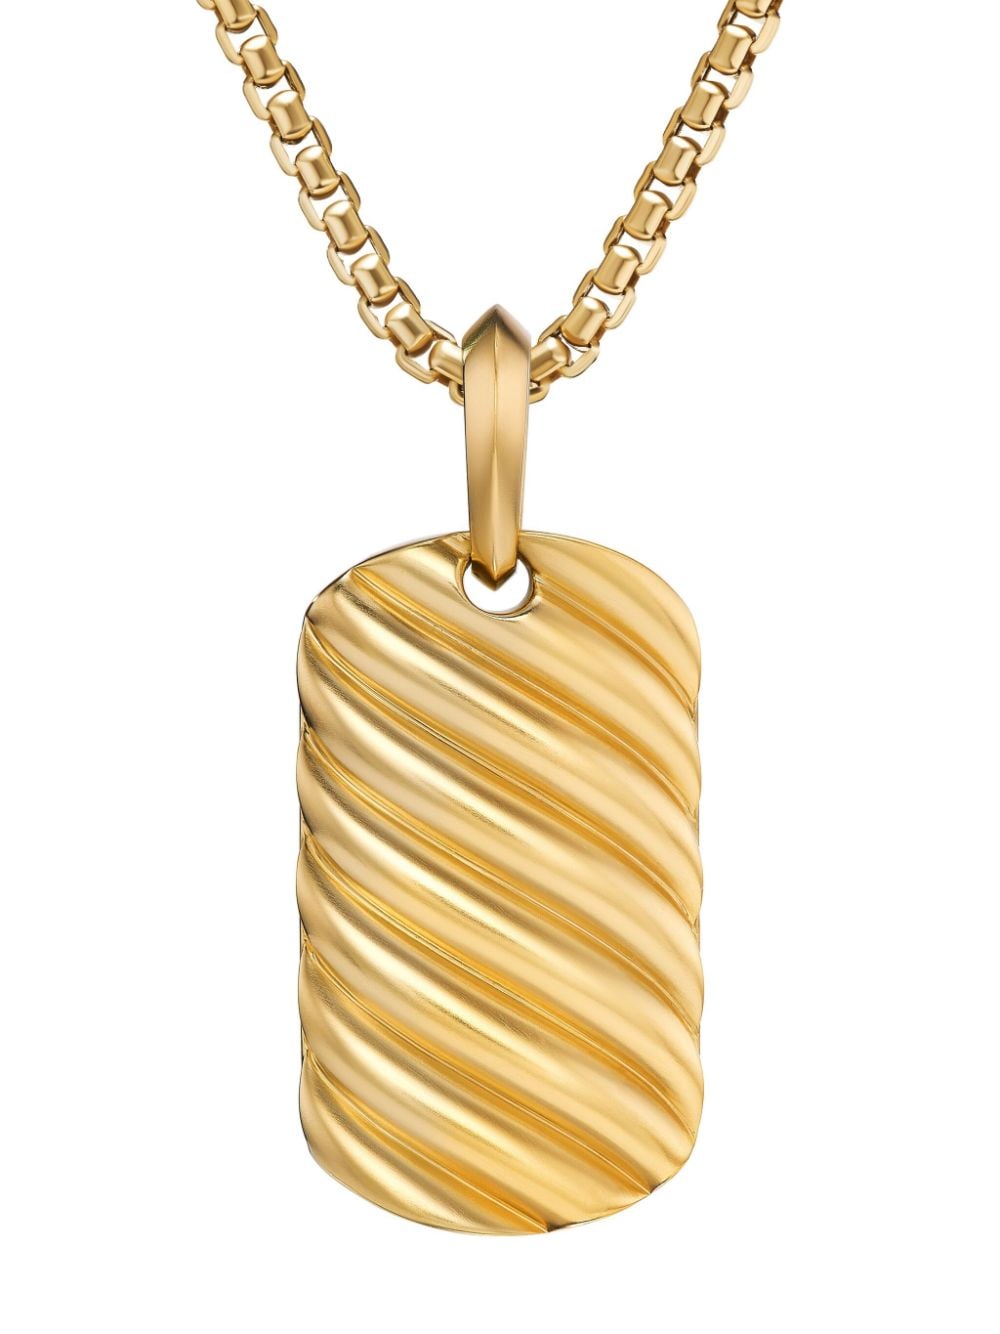 18kt yellow gold Sculpted Cable Tag necklace charm